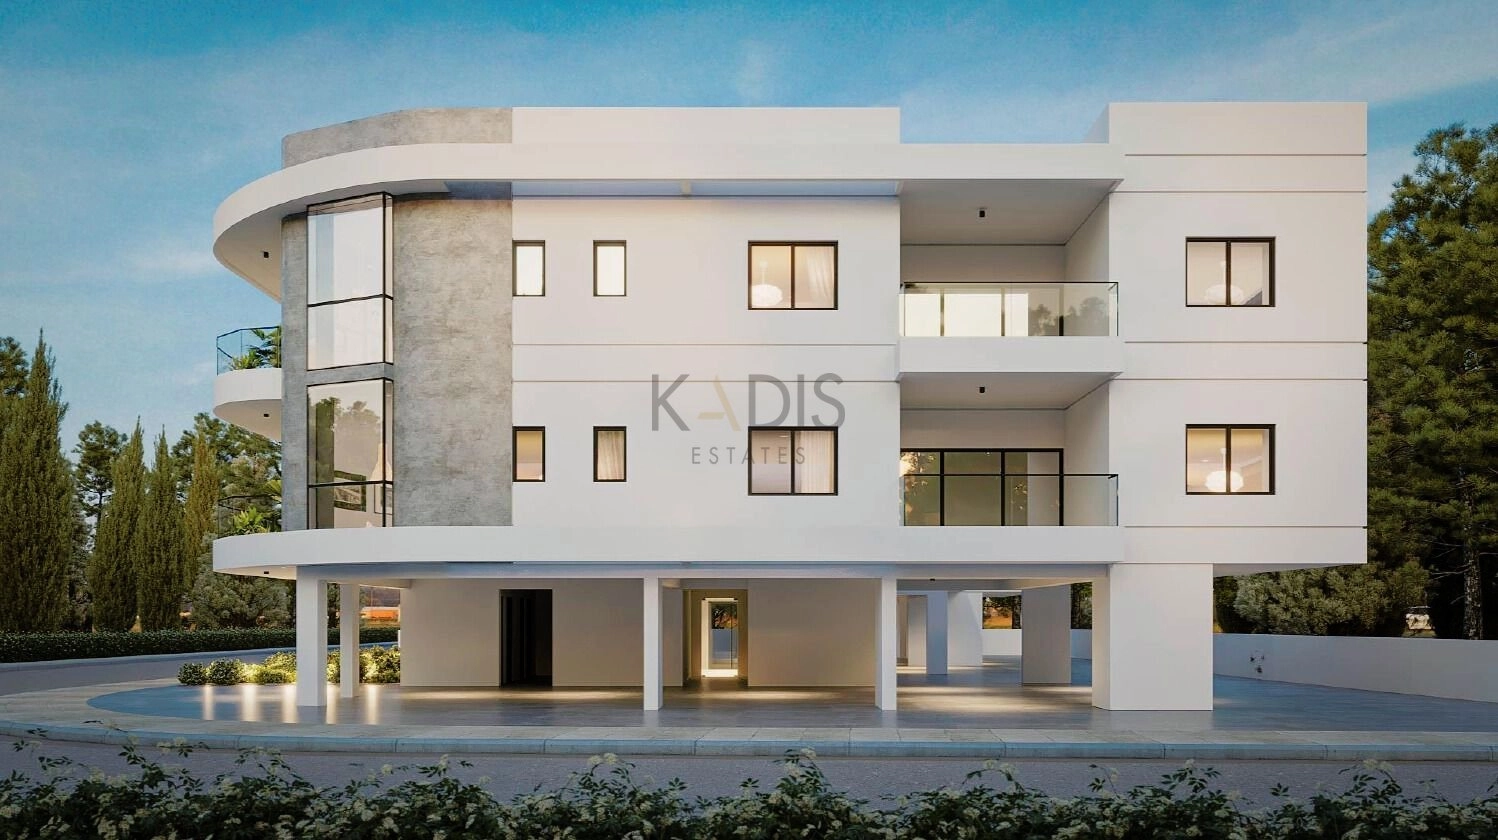 2 Bedroom Apartment for Sale in Nicosia District